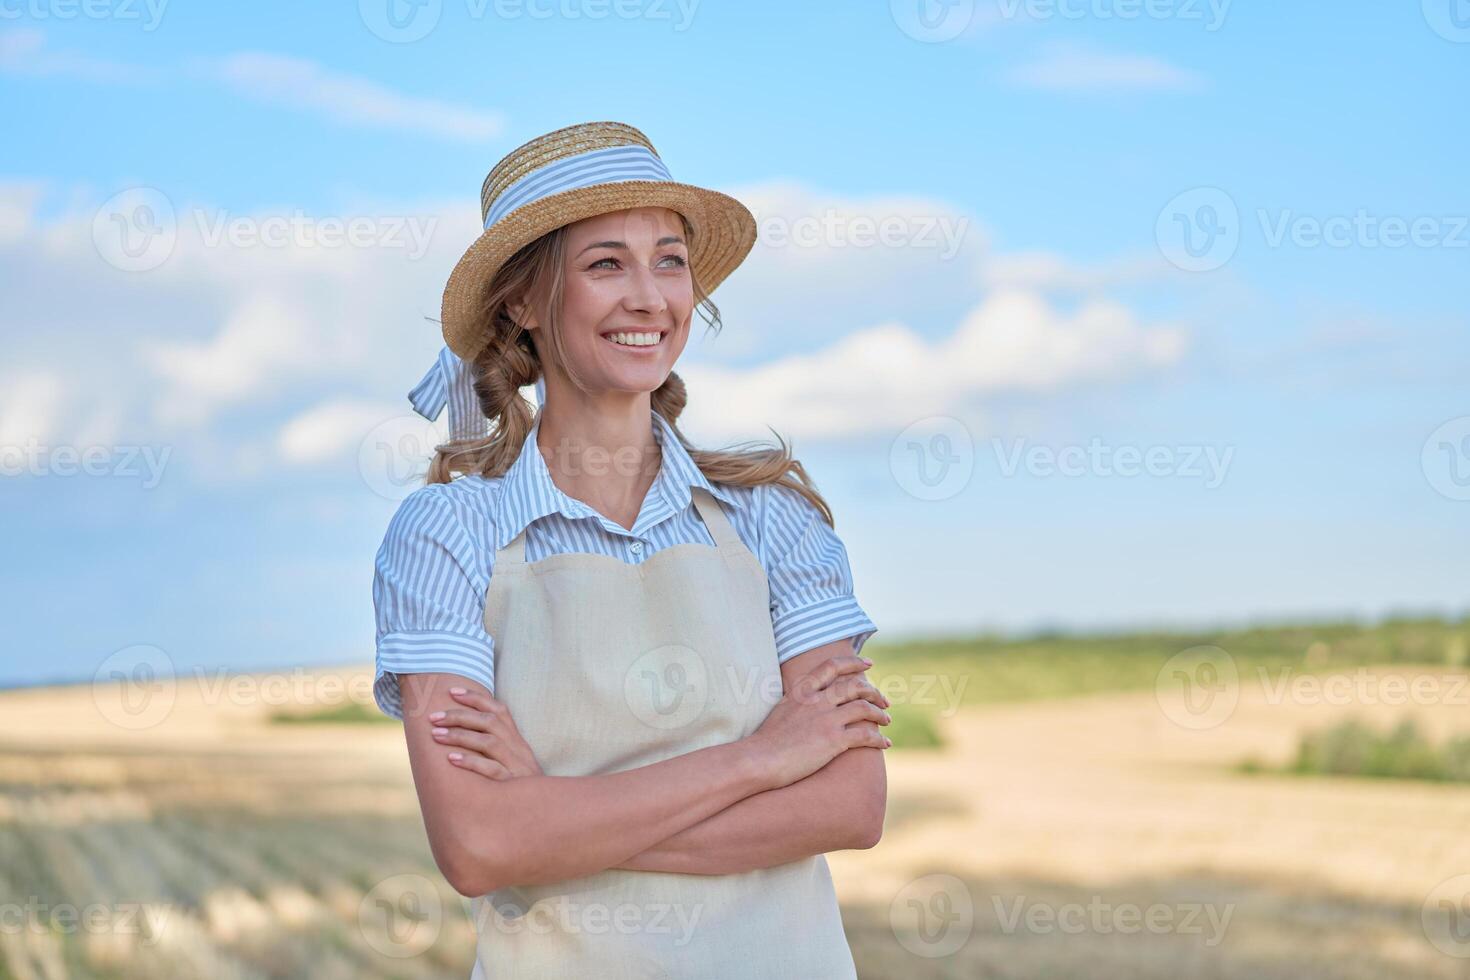 Woman farmer straw hat apron standing farmland smiling Female agronomist specialist farming agribusiness Happy positive caucasian worker agricultural field photo